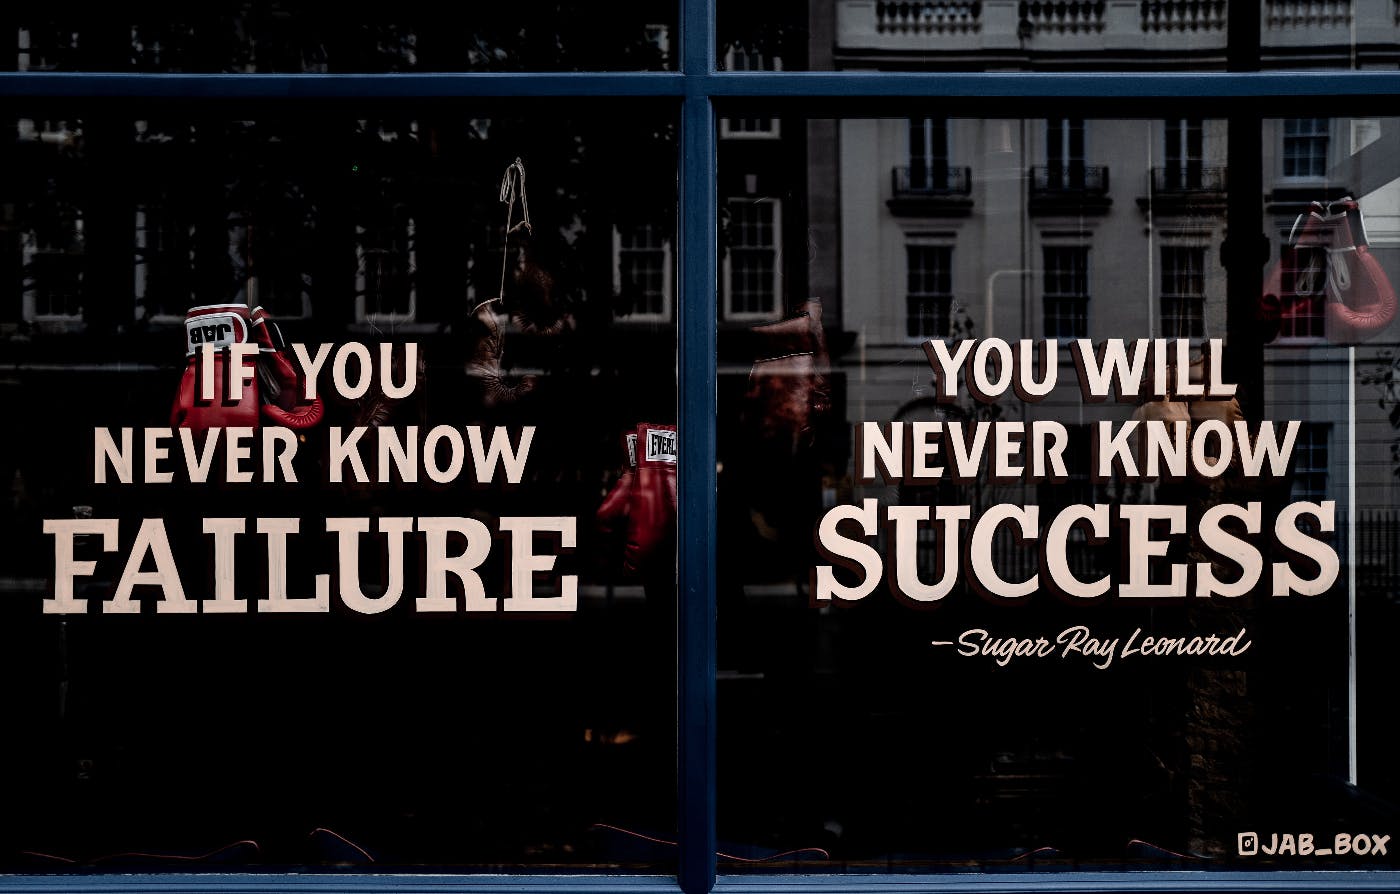 Fromnt windows of a boxing gym with the Sugar Ray Leonard quote: "If you never know failure, you will never know success"